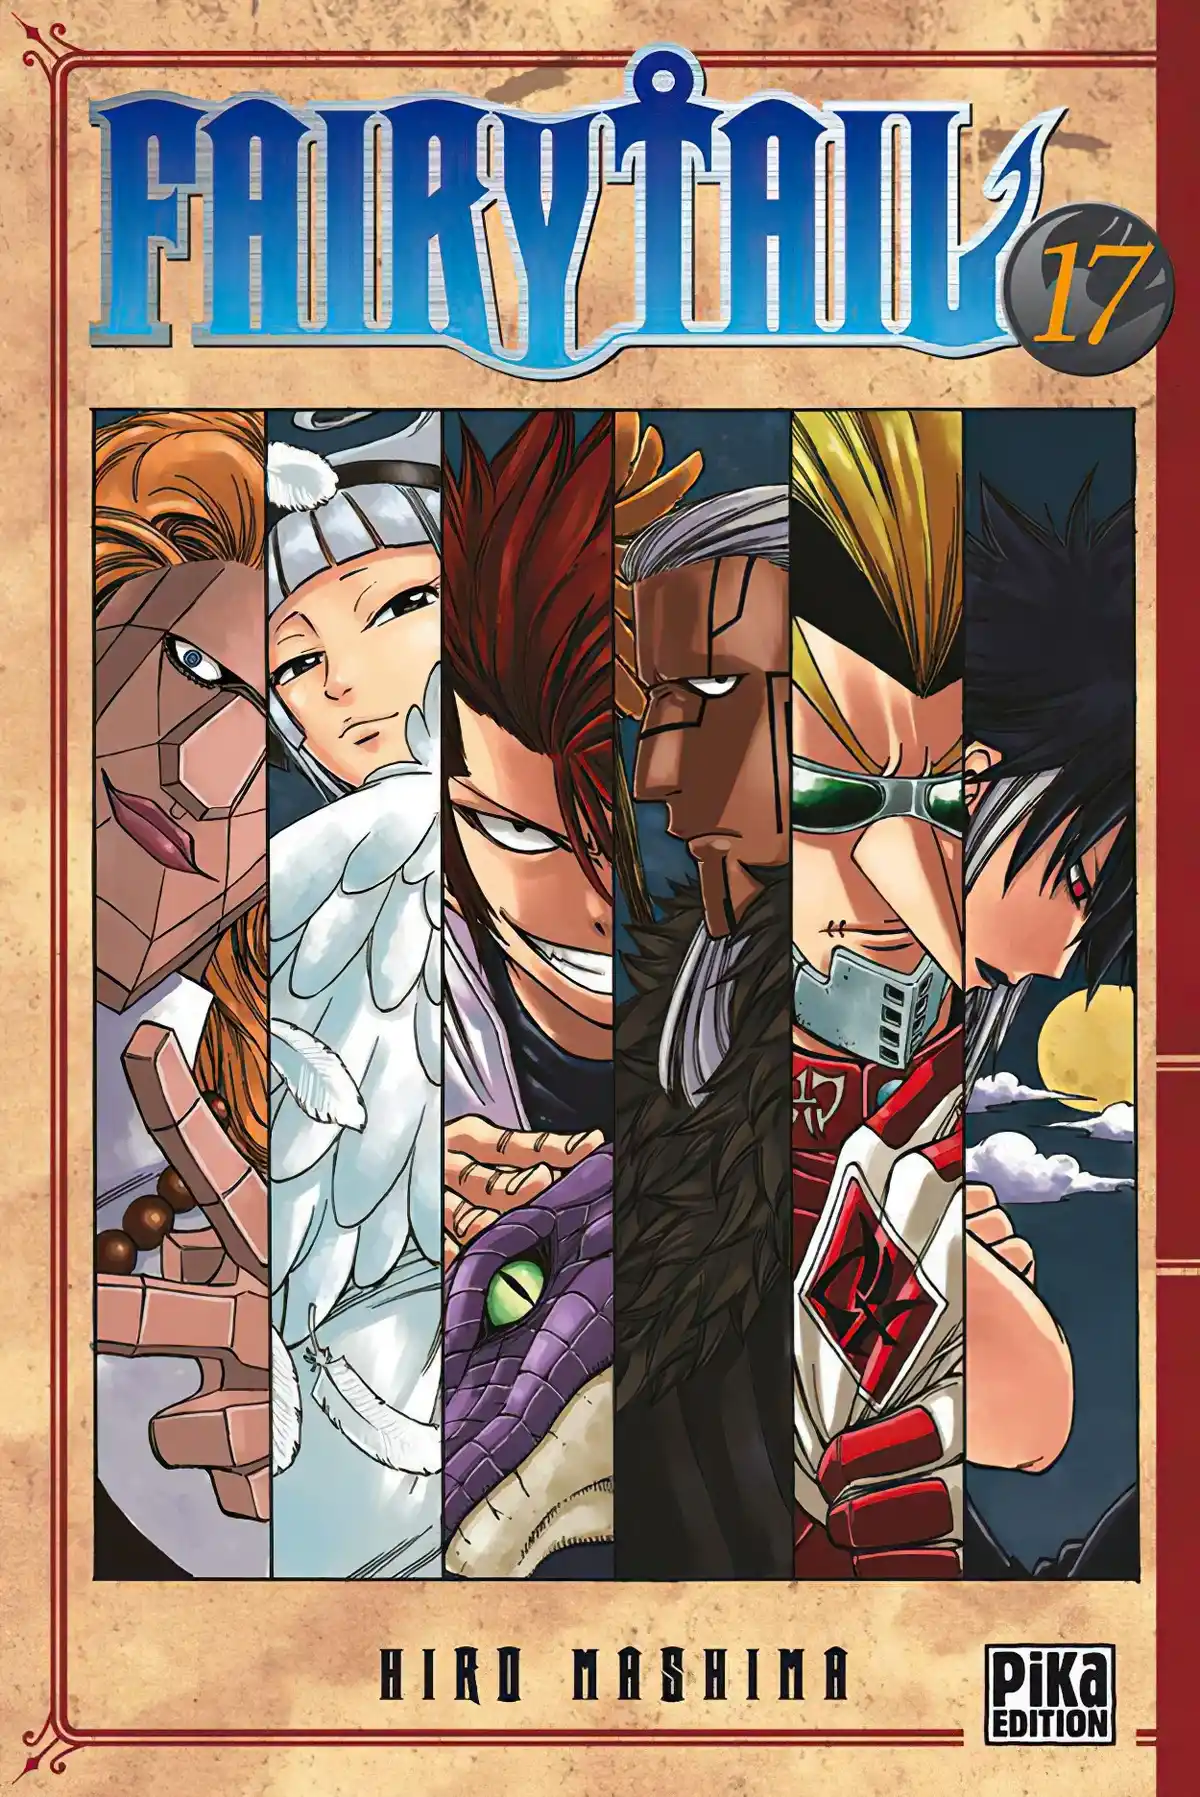 Fairy Tail Volume 17 page 1